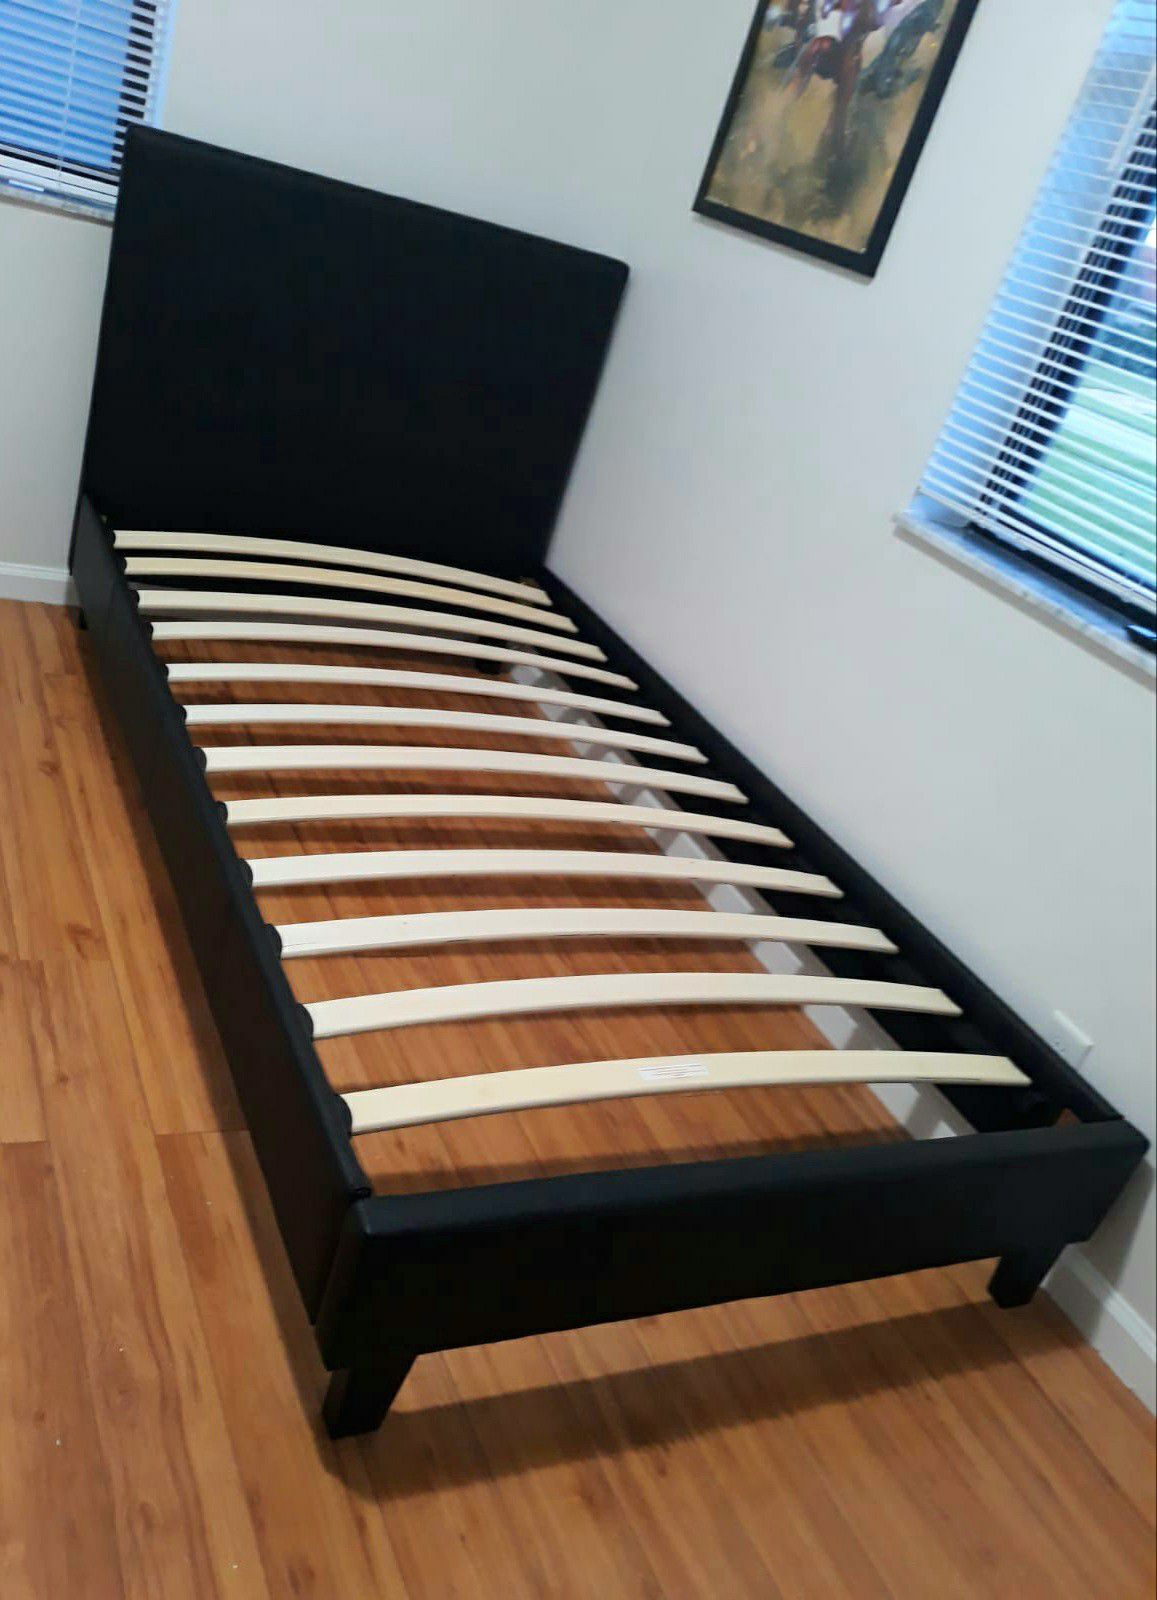 NEW IN BOX - TWIN UPHOLSTERED BED FRAME PLATFORM 😊 MATTRESS SOLD SEPARATELY